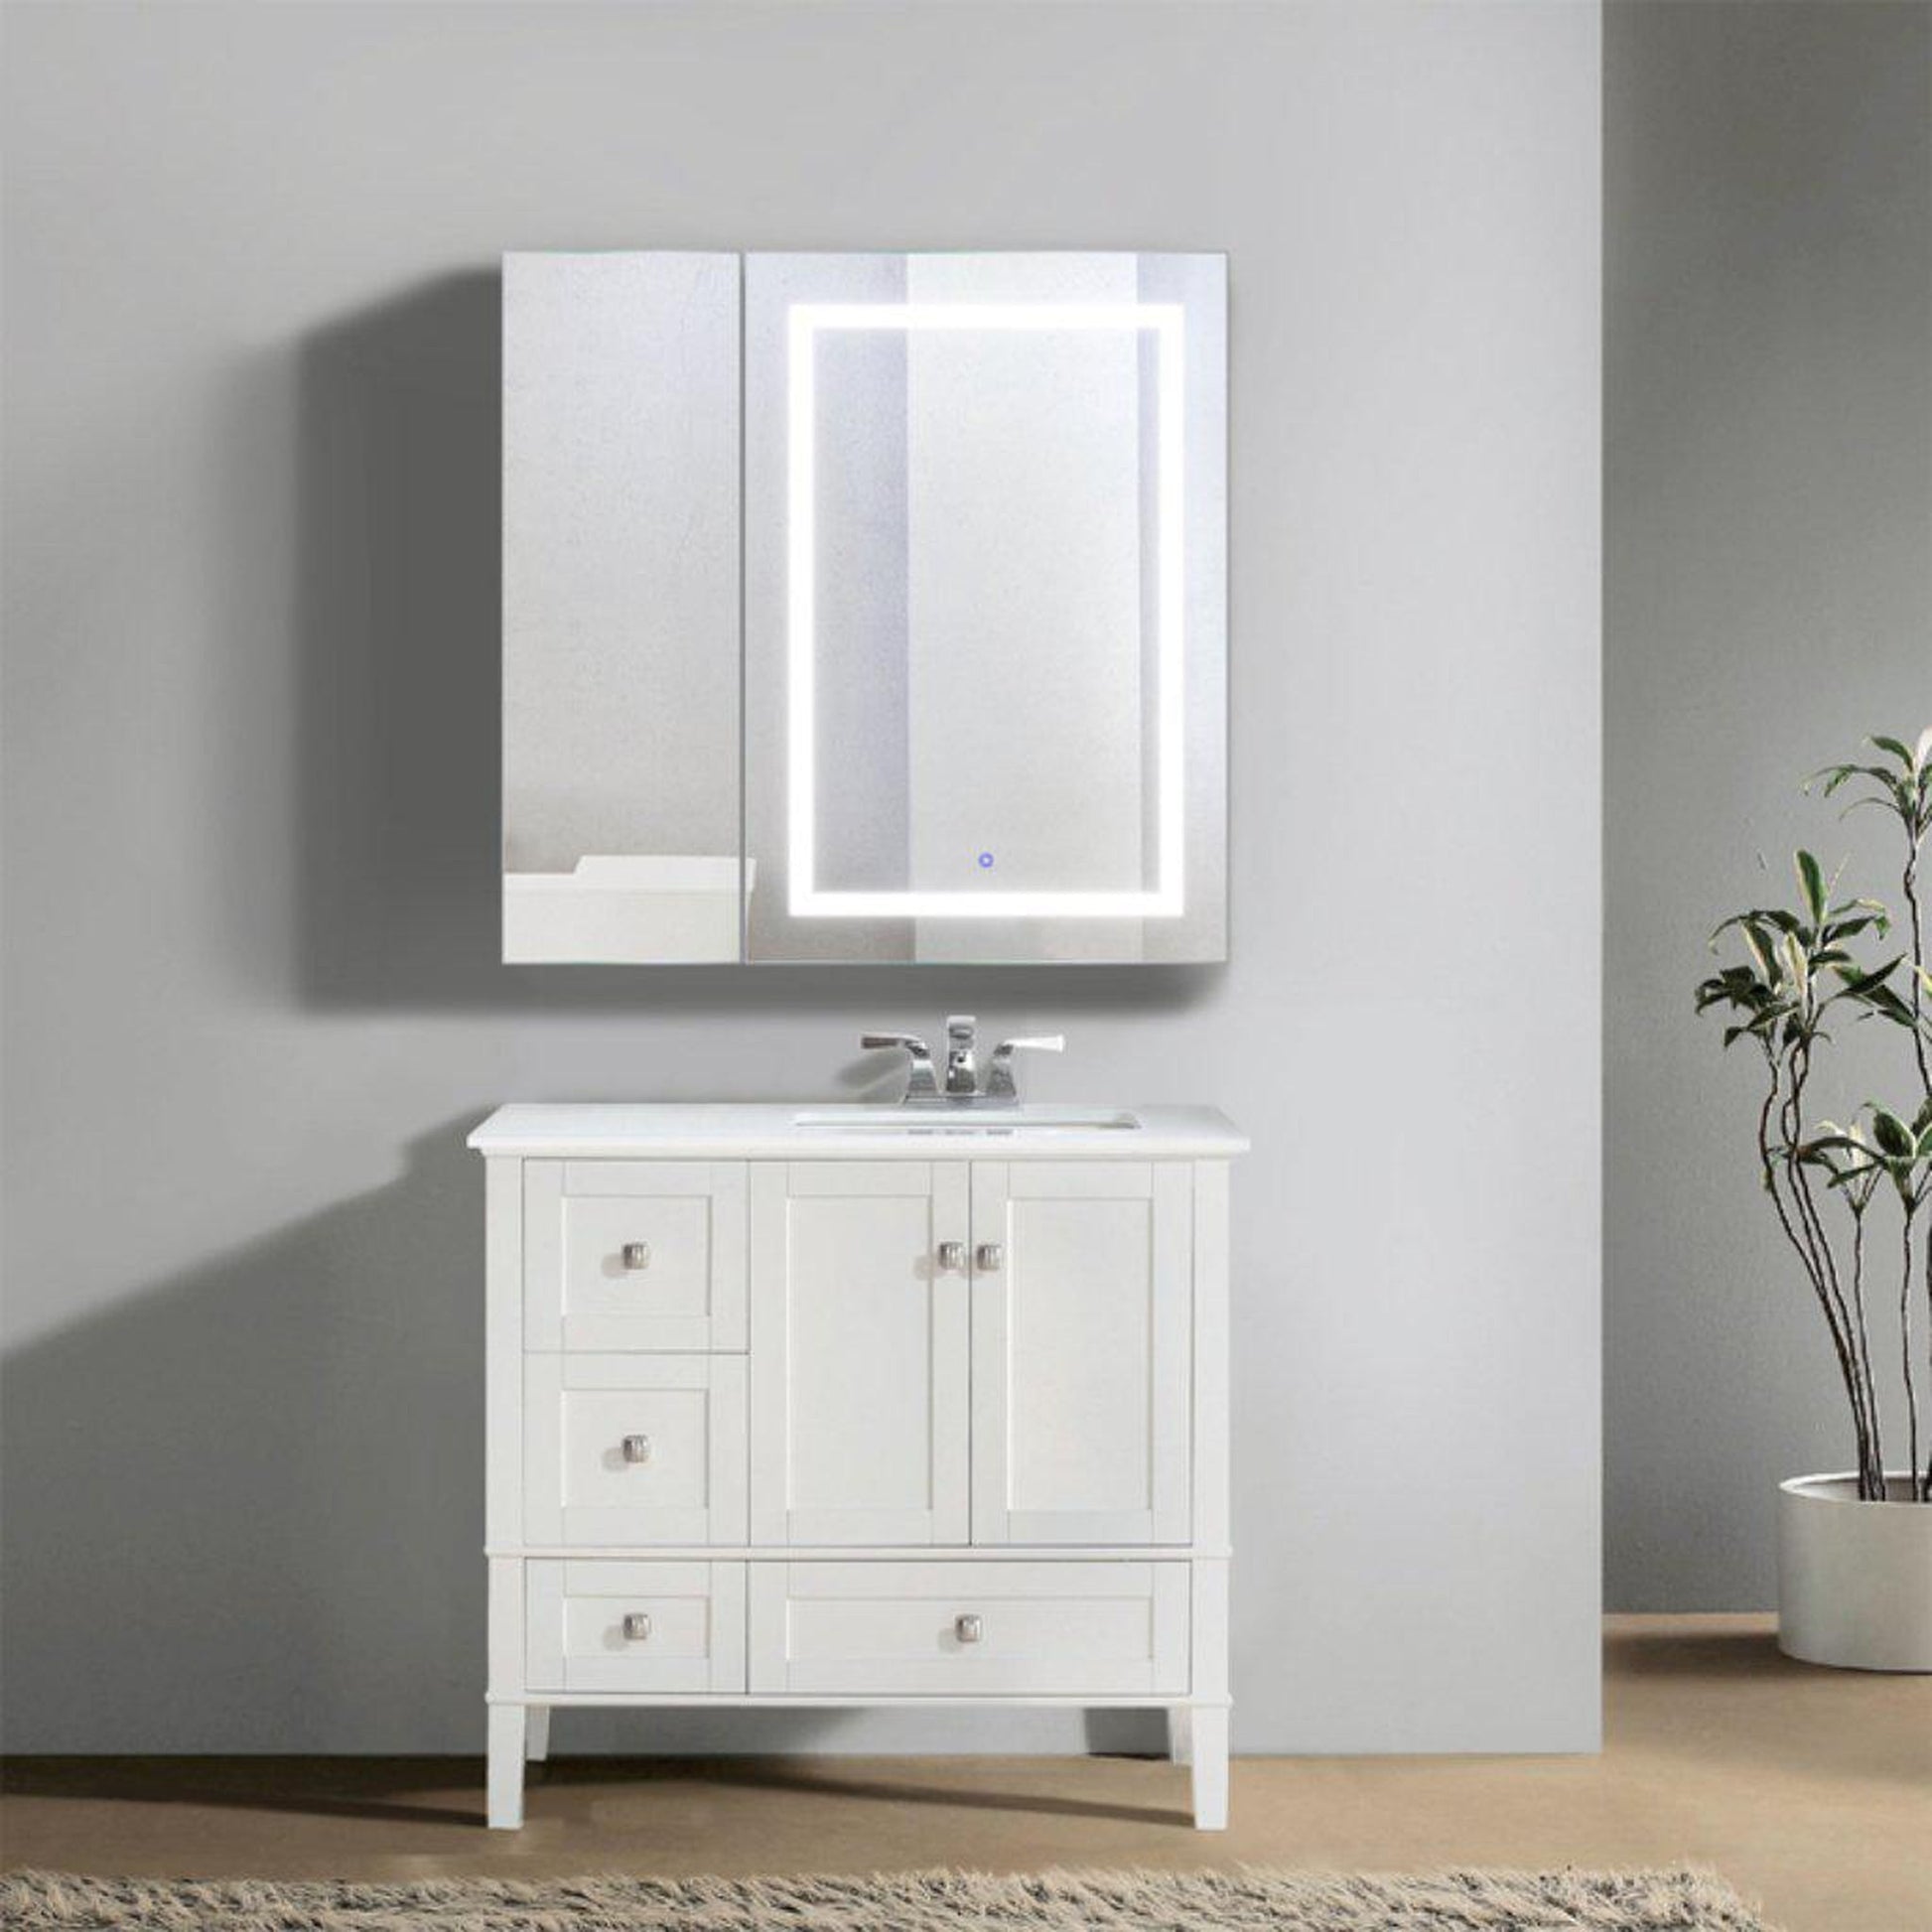 Krugg Reflections Svange 36" x 36" 5000K Single Bi-View Right Opening Recessed/Surface-Mount Illuminated Silver Backed LED Medicine Cabinet Mirror With Built-in Defogger, Dimmer and Electrical Outlet